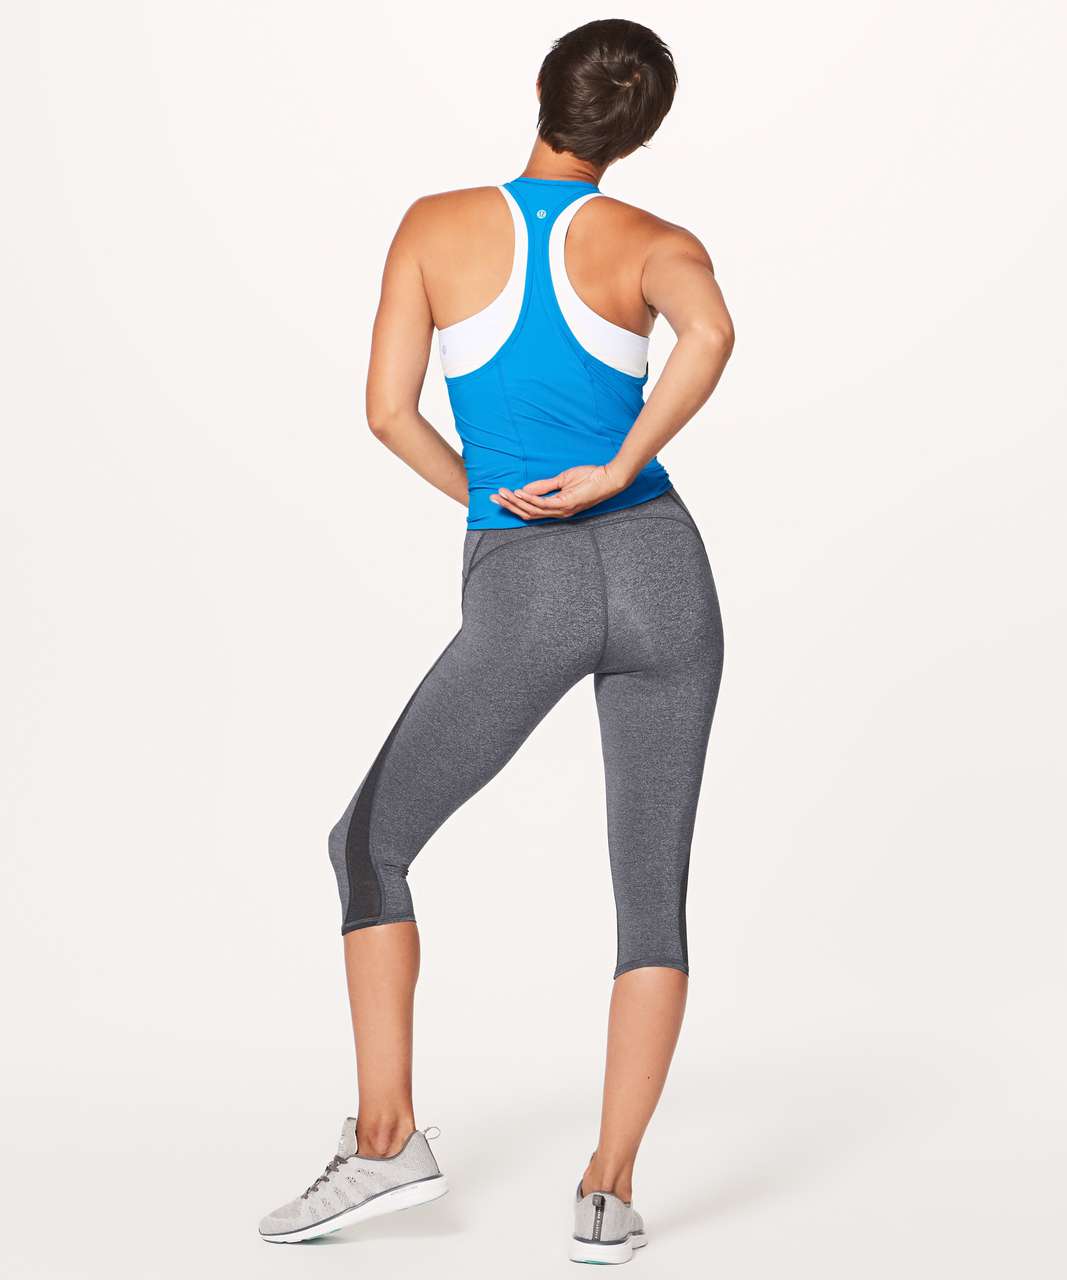 Lululemon Train Times Crop (17 ) Nocturnal Teal Size 6 - $39 - From Keahida